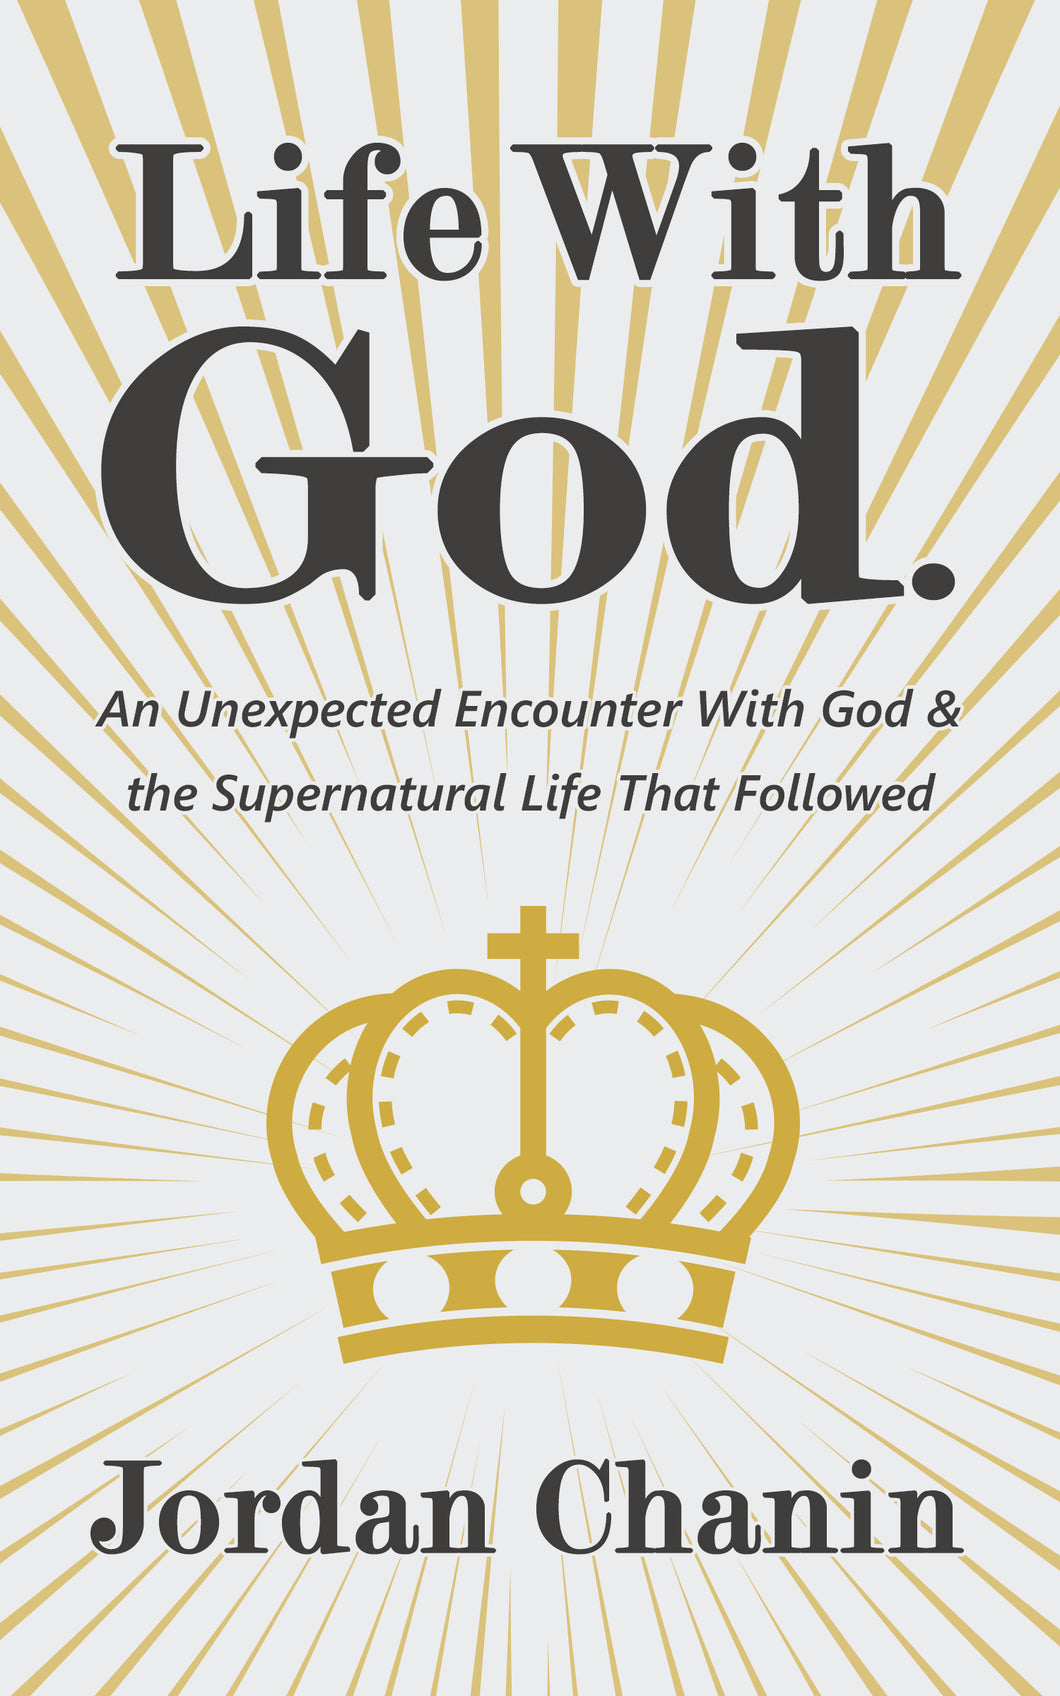 Life with God: An Unexpected Encounter with God and the Supernatural Life that Followed